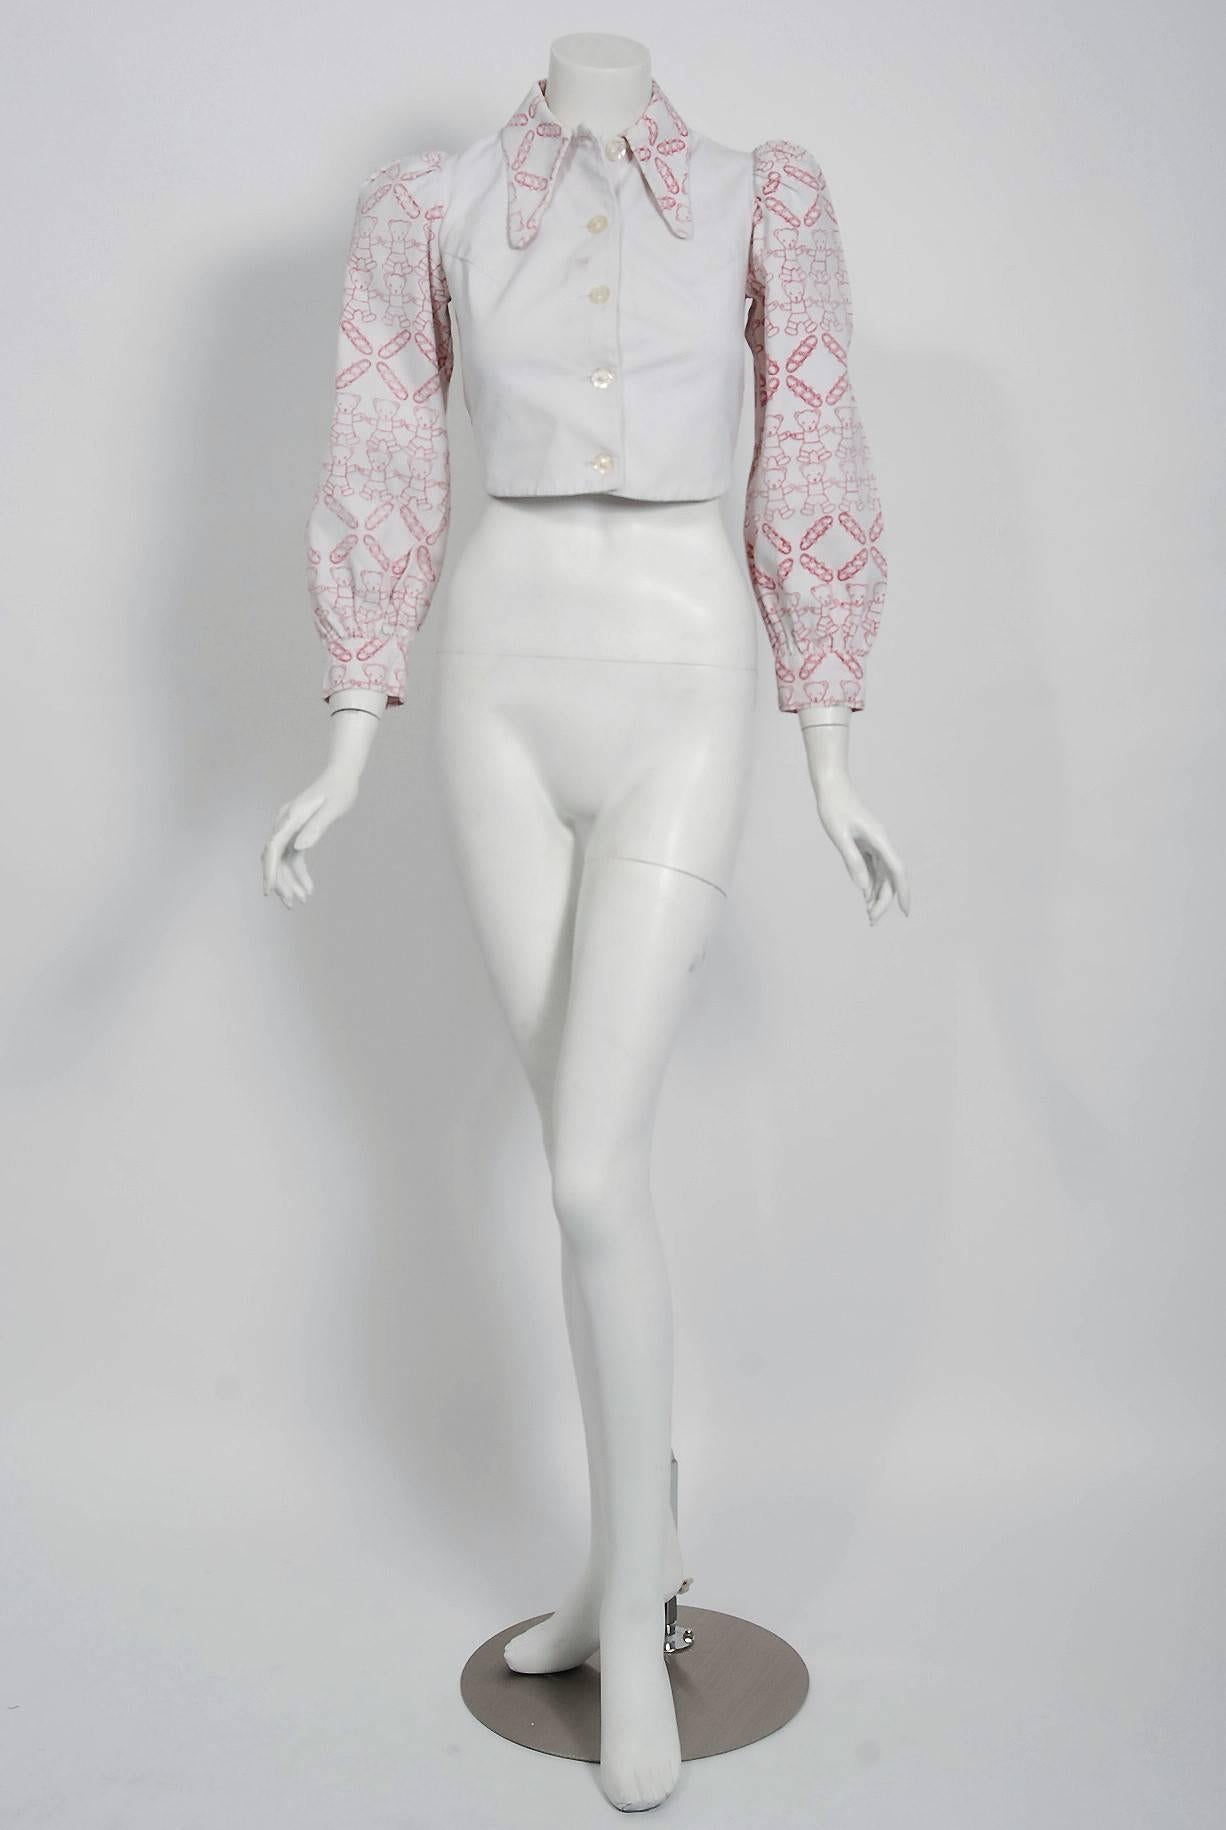 Important Zandra Rhodes and Sylvia Ayton Couture novelty print jacket dating back to 1968.  Zandra Rhodes was one of the British designers who put London at the forefront of the international fashion scene. Her designs are considered creative